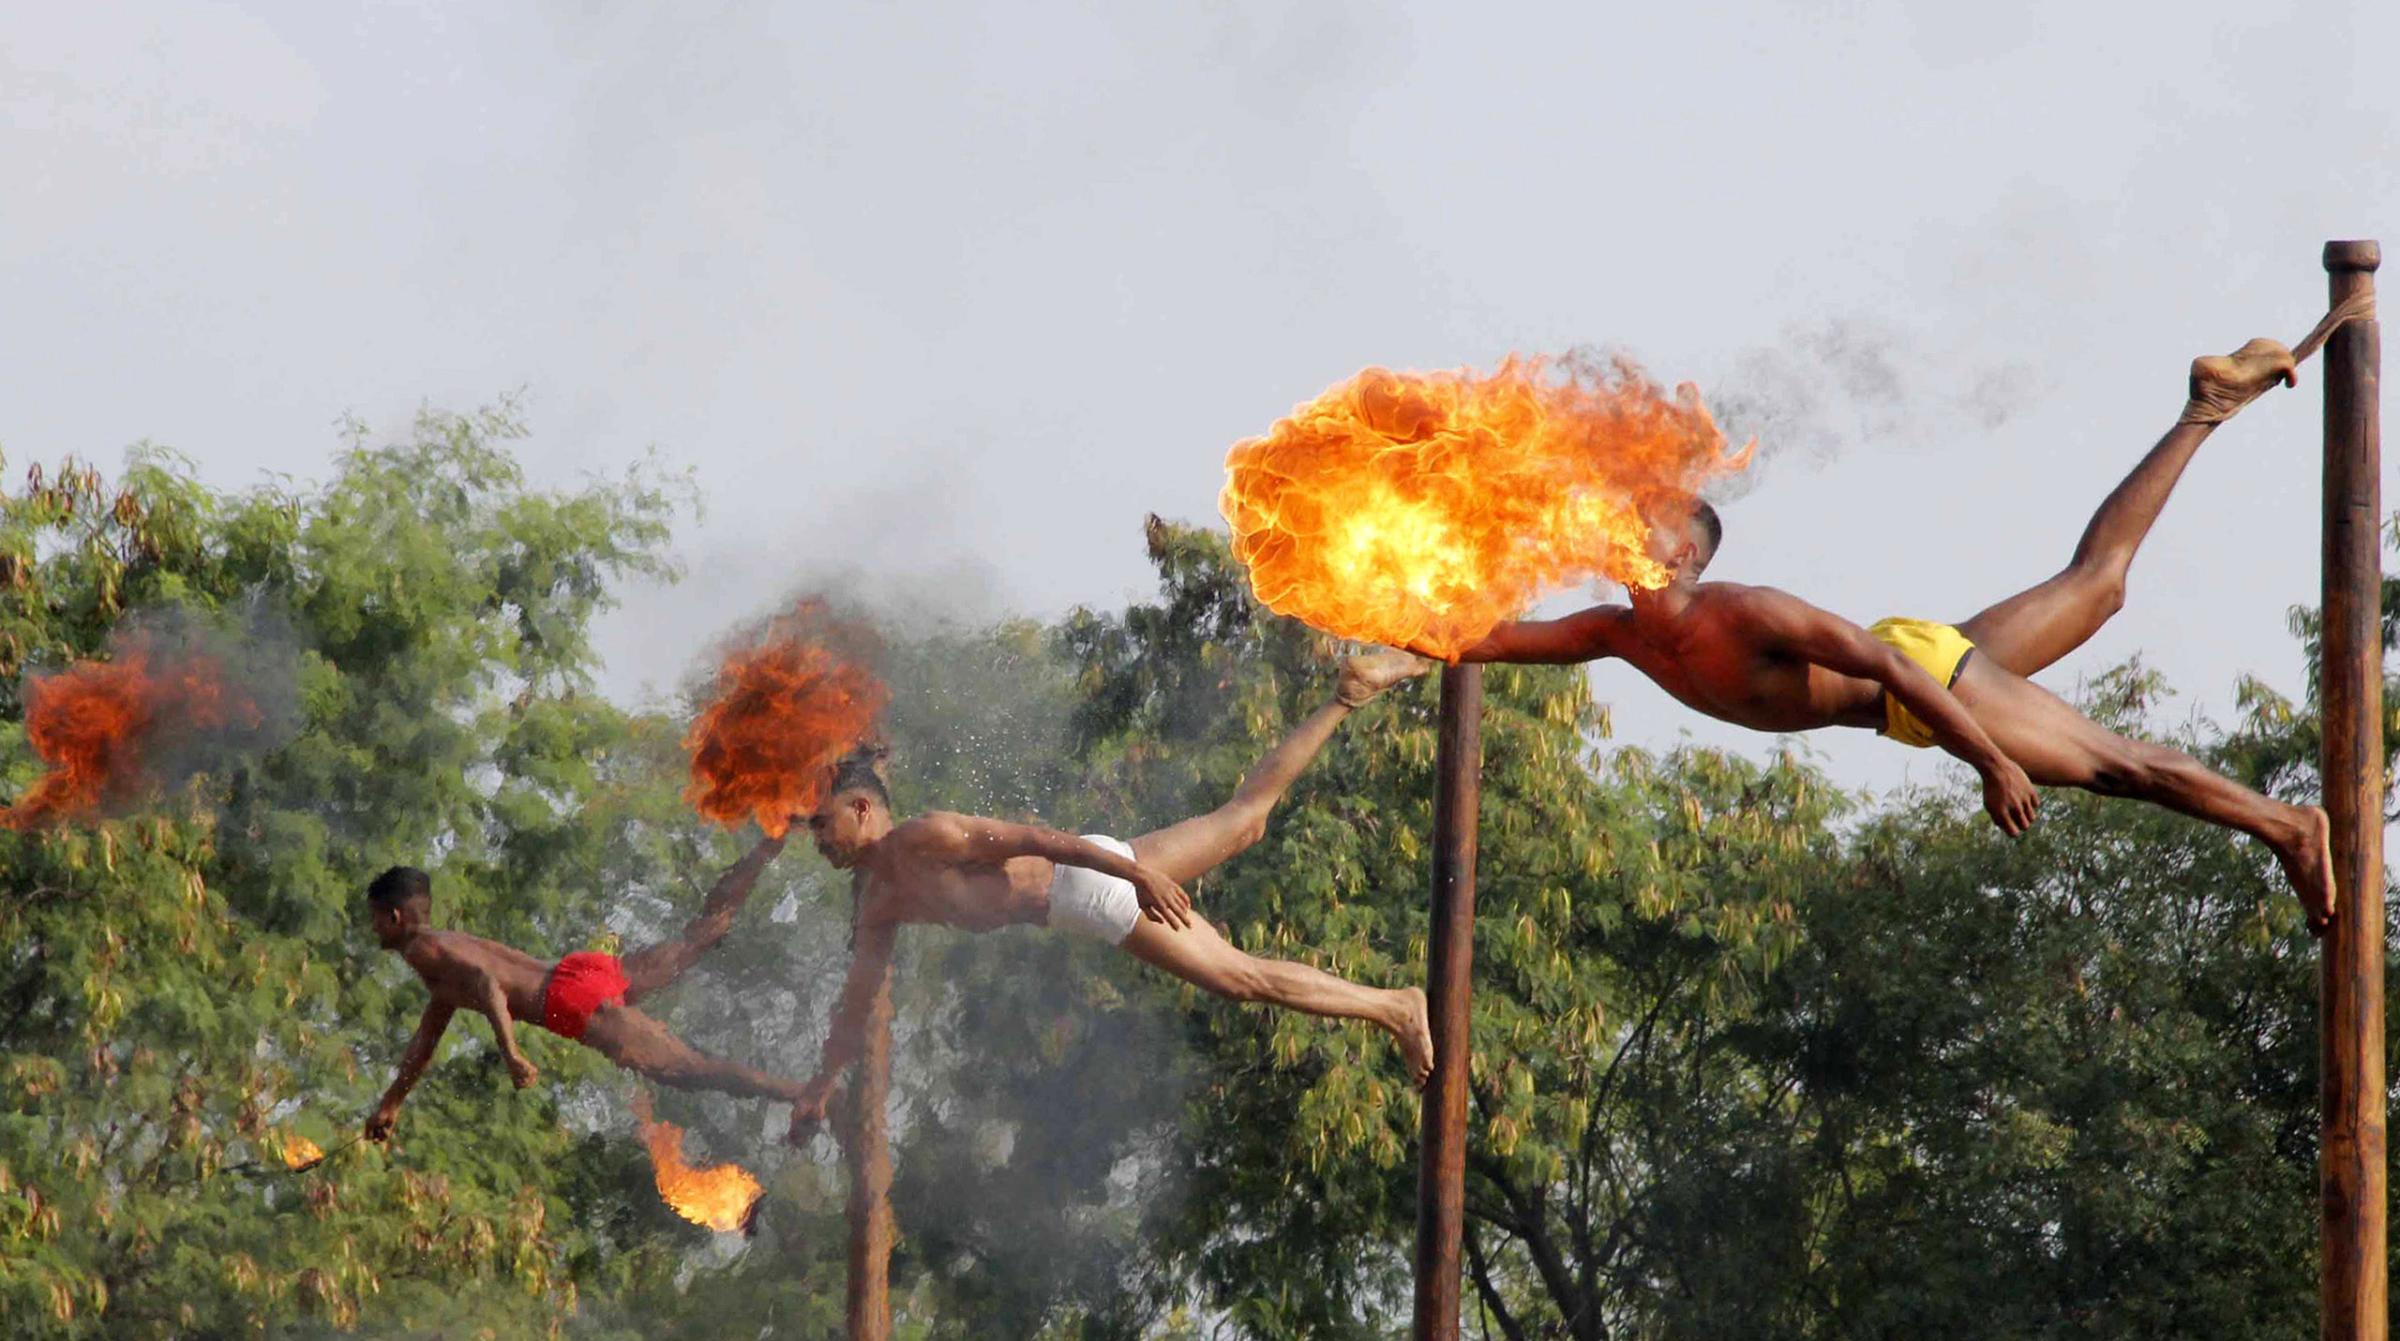 Indian soldiers take part in a demonstration of 'fire breathing' at the start of Operation Hand in Hand - a joint training exercise between Indian and Chinese troops - at Aundh Military Camp in Pune, India, on Nov.18, 2014.